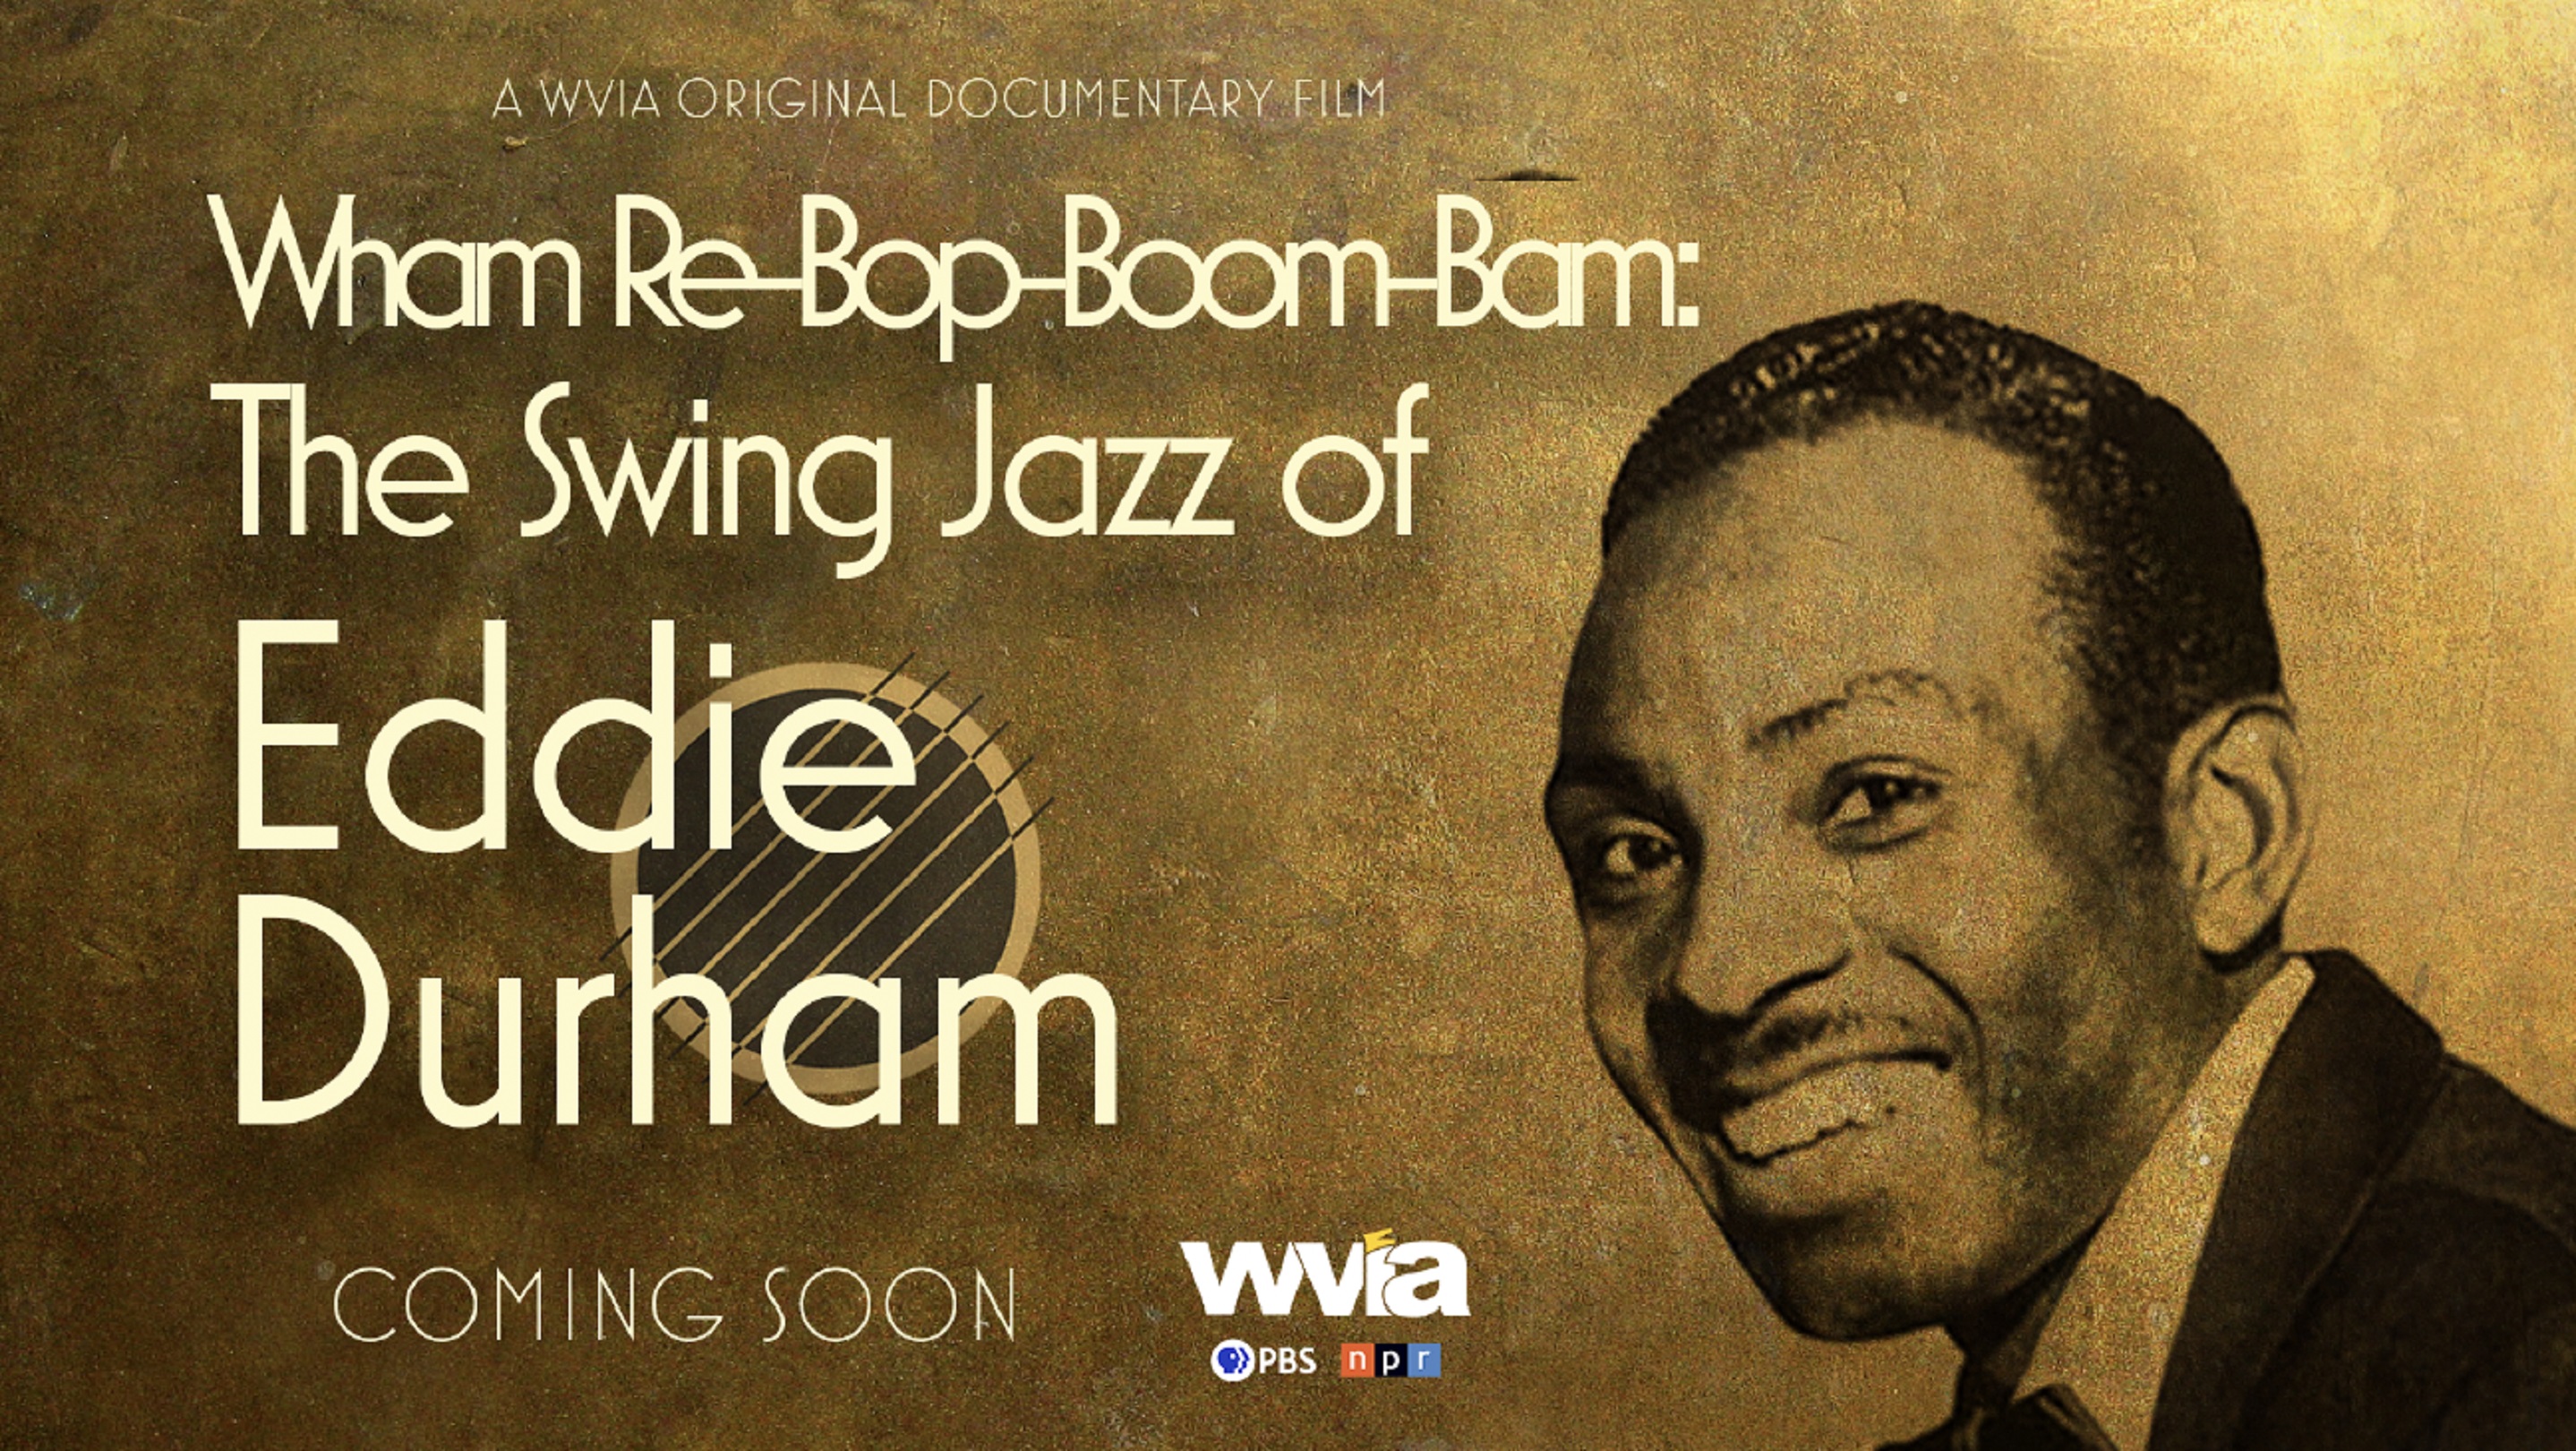 New Documentary Chronicles The Life And Musical Career Of Swing Jazz Pioneer, Eddie Durham